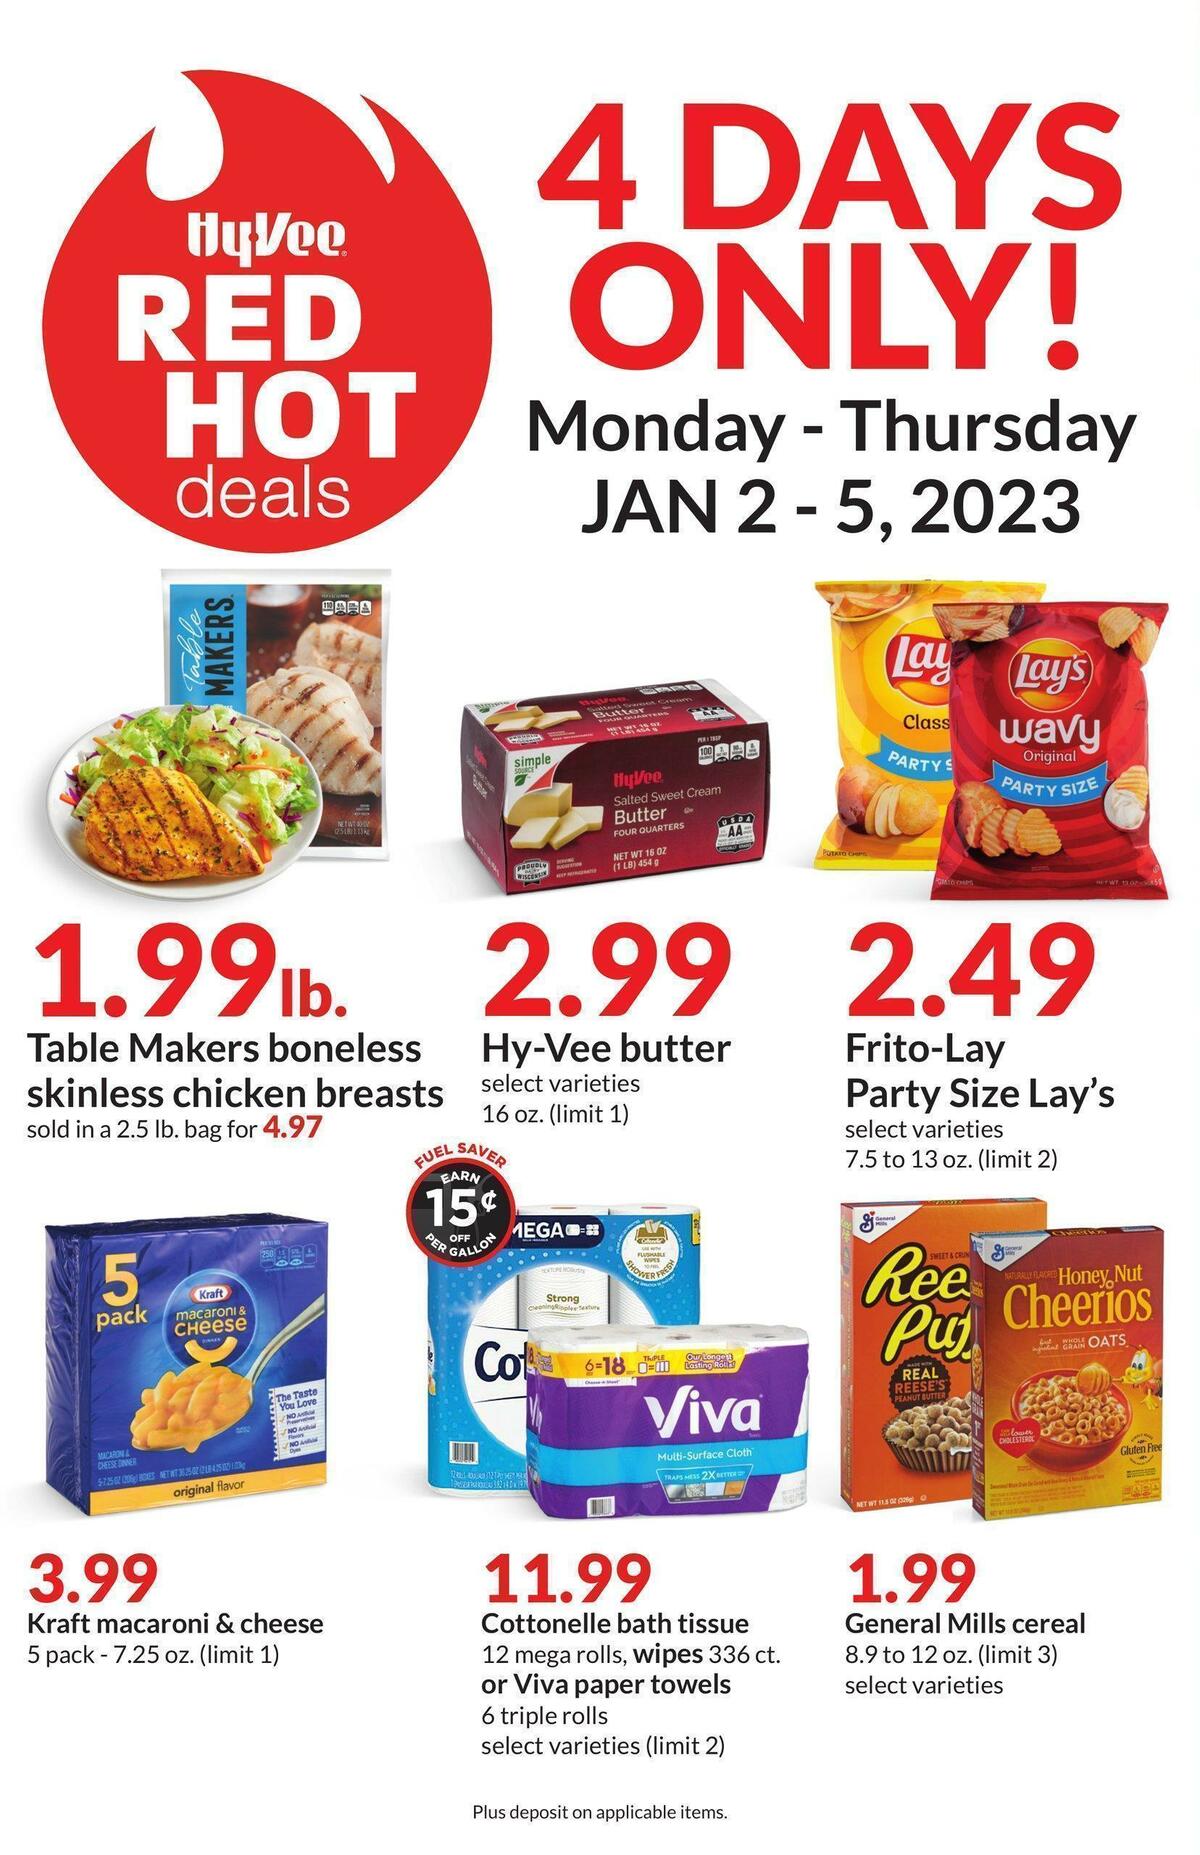 Hy-Vee 4 Days Only! Weekly Ad from January 2